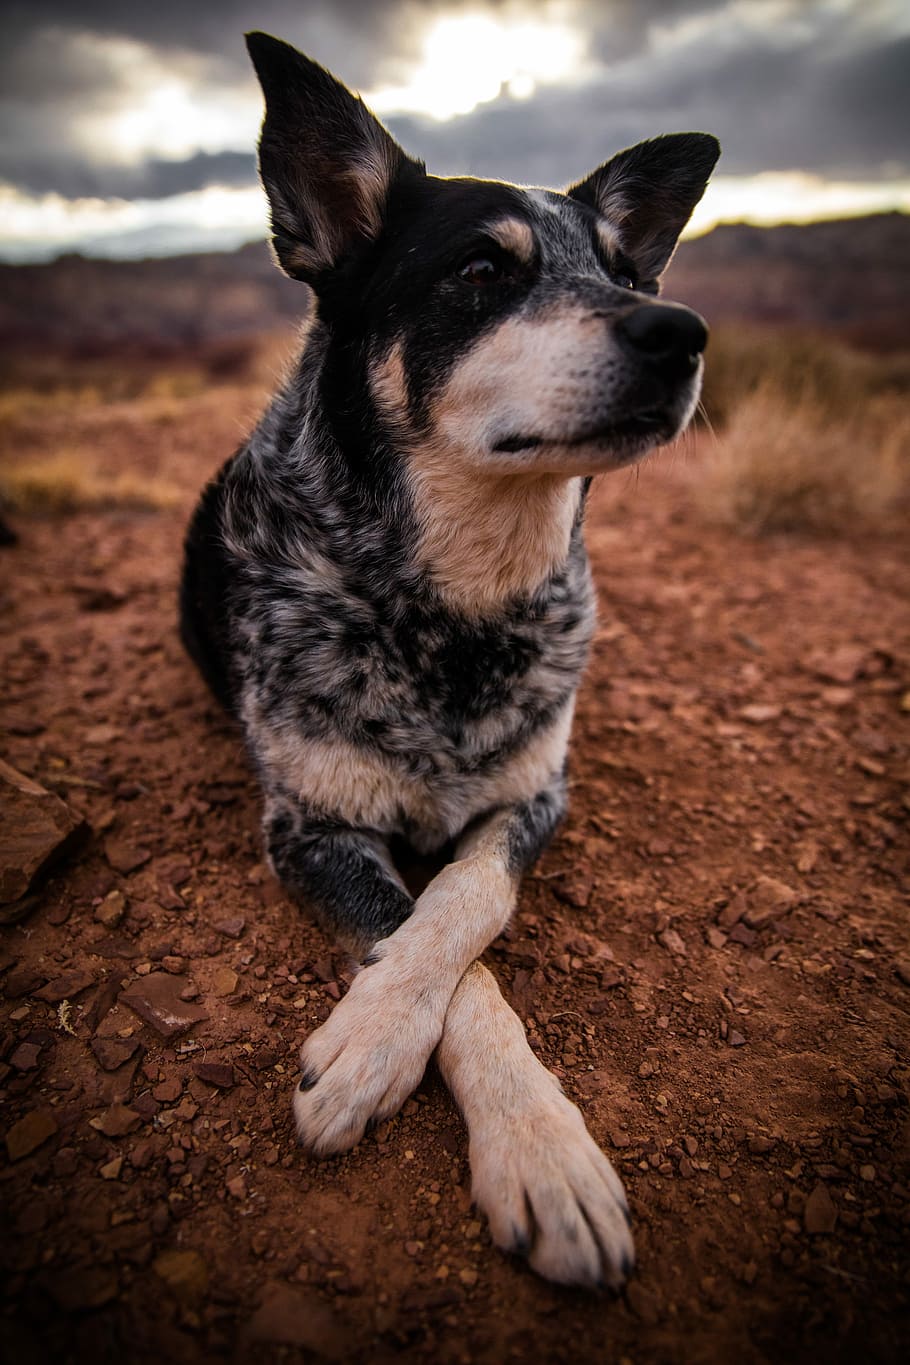 black and tan dog on brown soil, adult brown and white Australian cattle dog